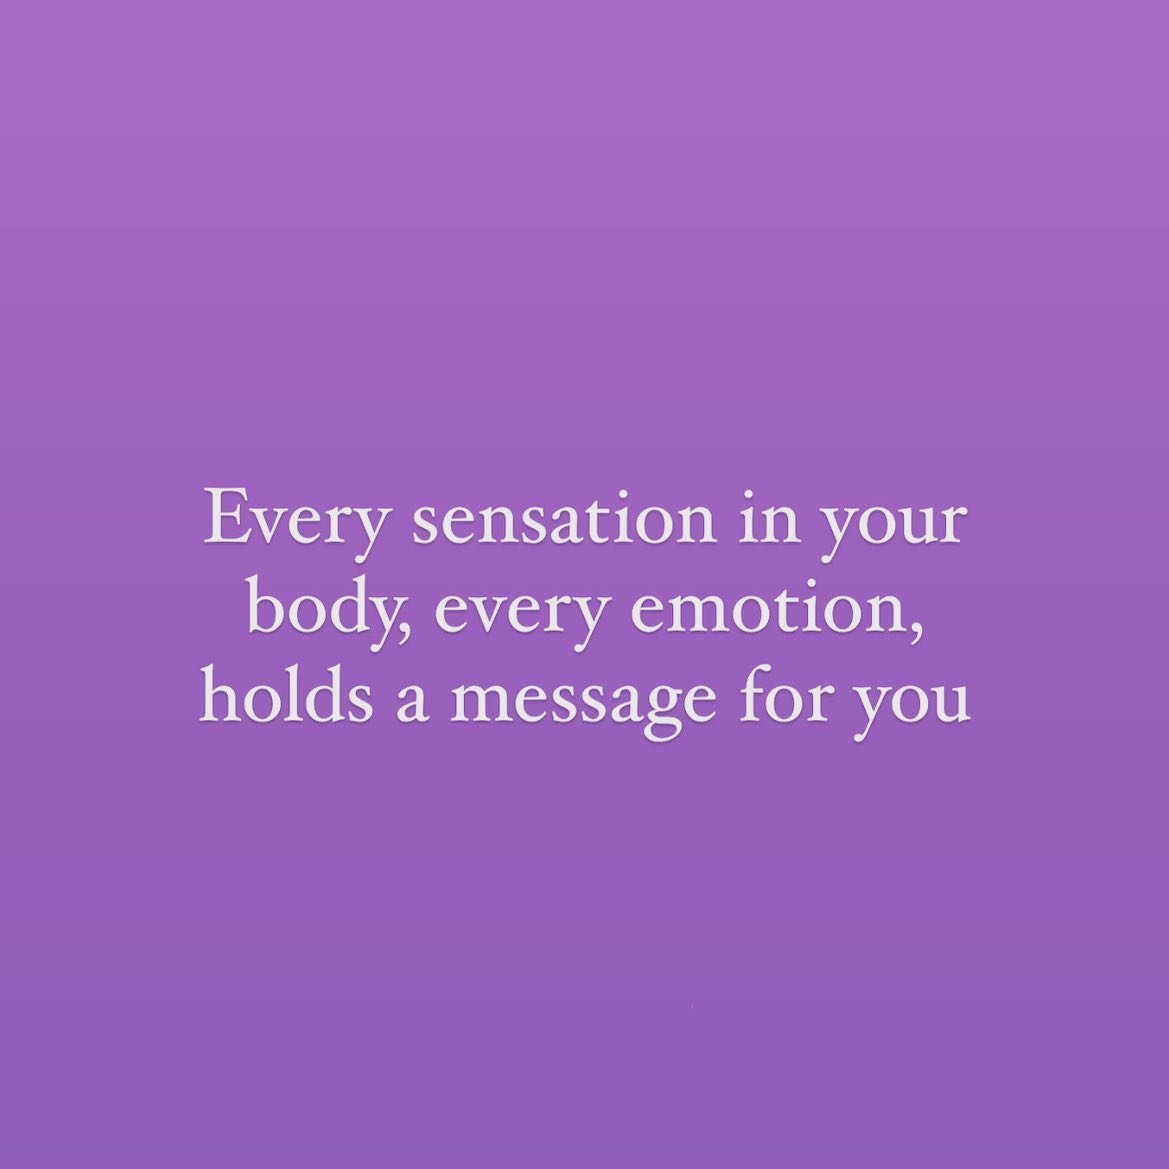 Instead of fearing the sensations &amp; feelings in your body, what if you turned towards them?

I&rsquo;ve been playing around with noticing pain in my body and instead of labeling it as &ldquo;bad&rdquo; I&rsquo;m giving it a neutral term, such as,